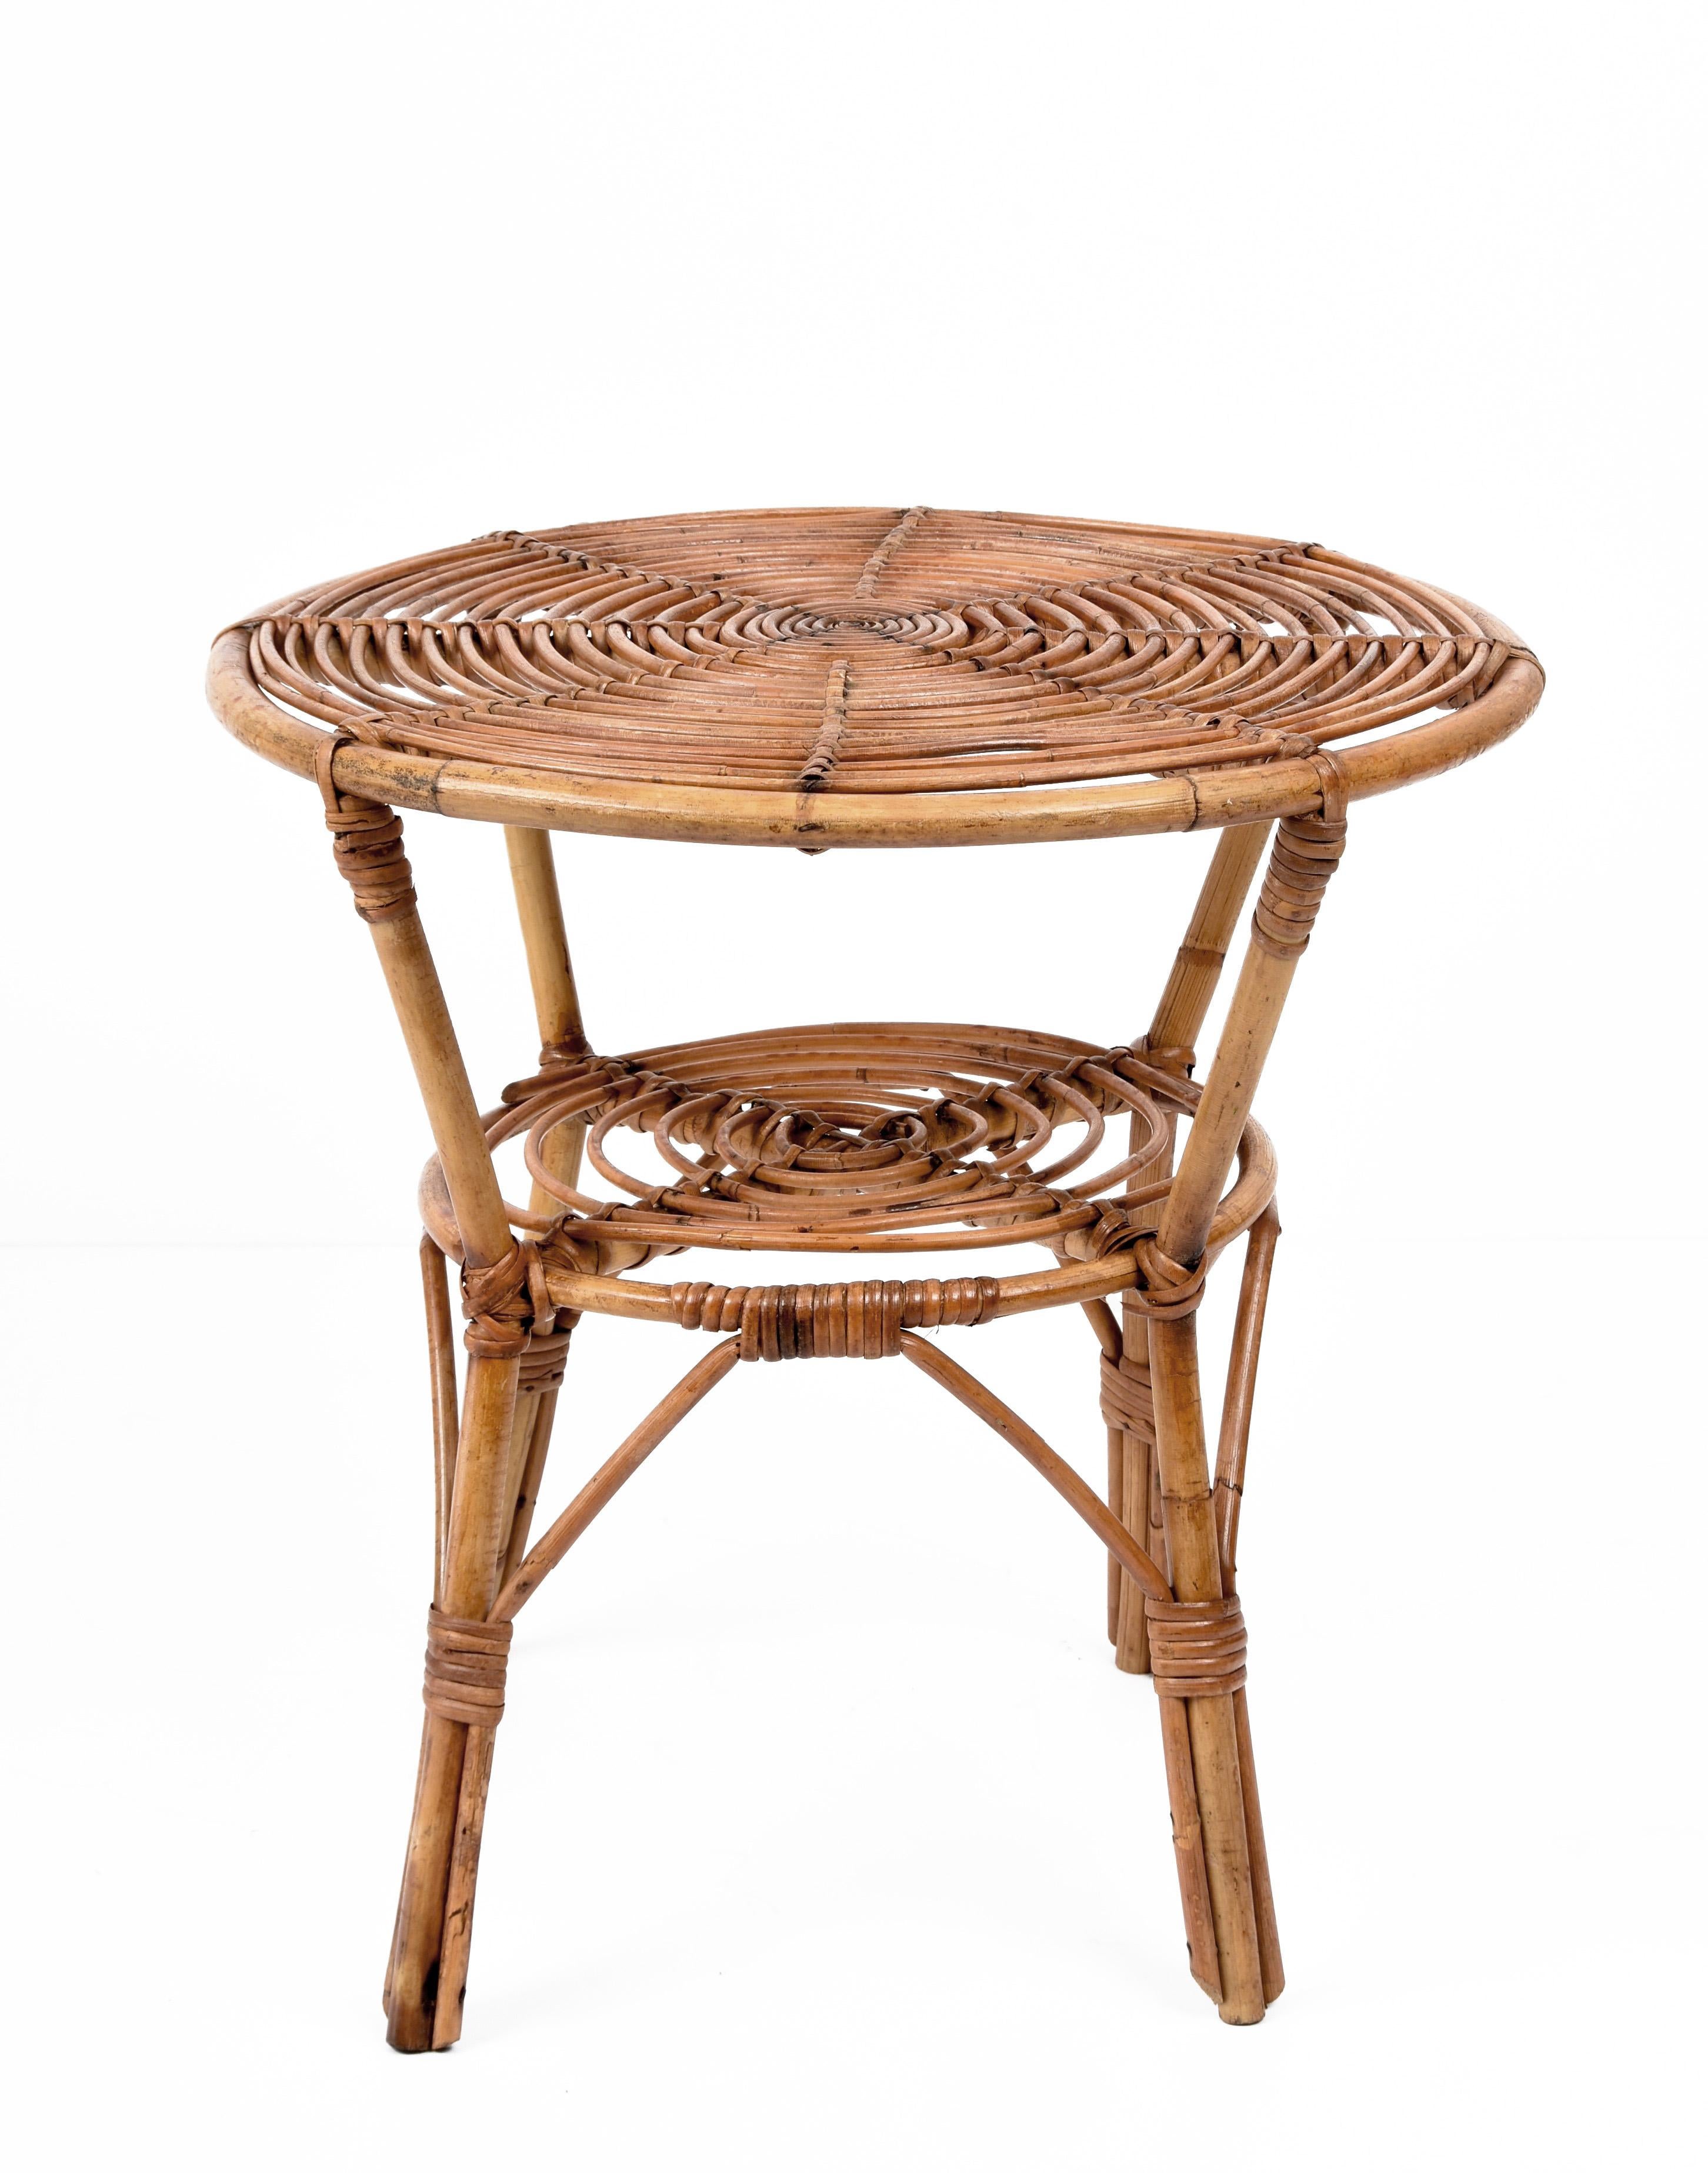 Amazing midcentury round coffee table in rattan, wicker and bamboo. This wonderful French Riviera style coffee table was produced in Italy during the 1960s.

Fully handmade with perfect proportions, this gorgeous table is made in curved bamboo and